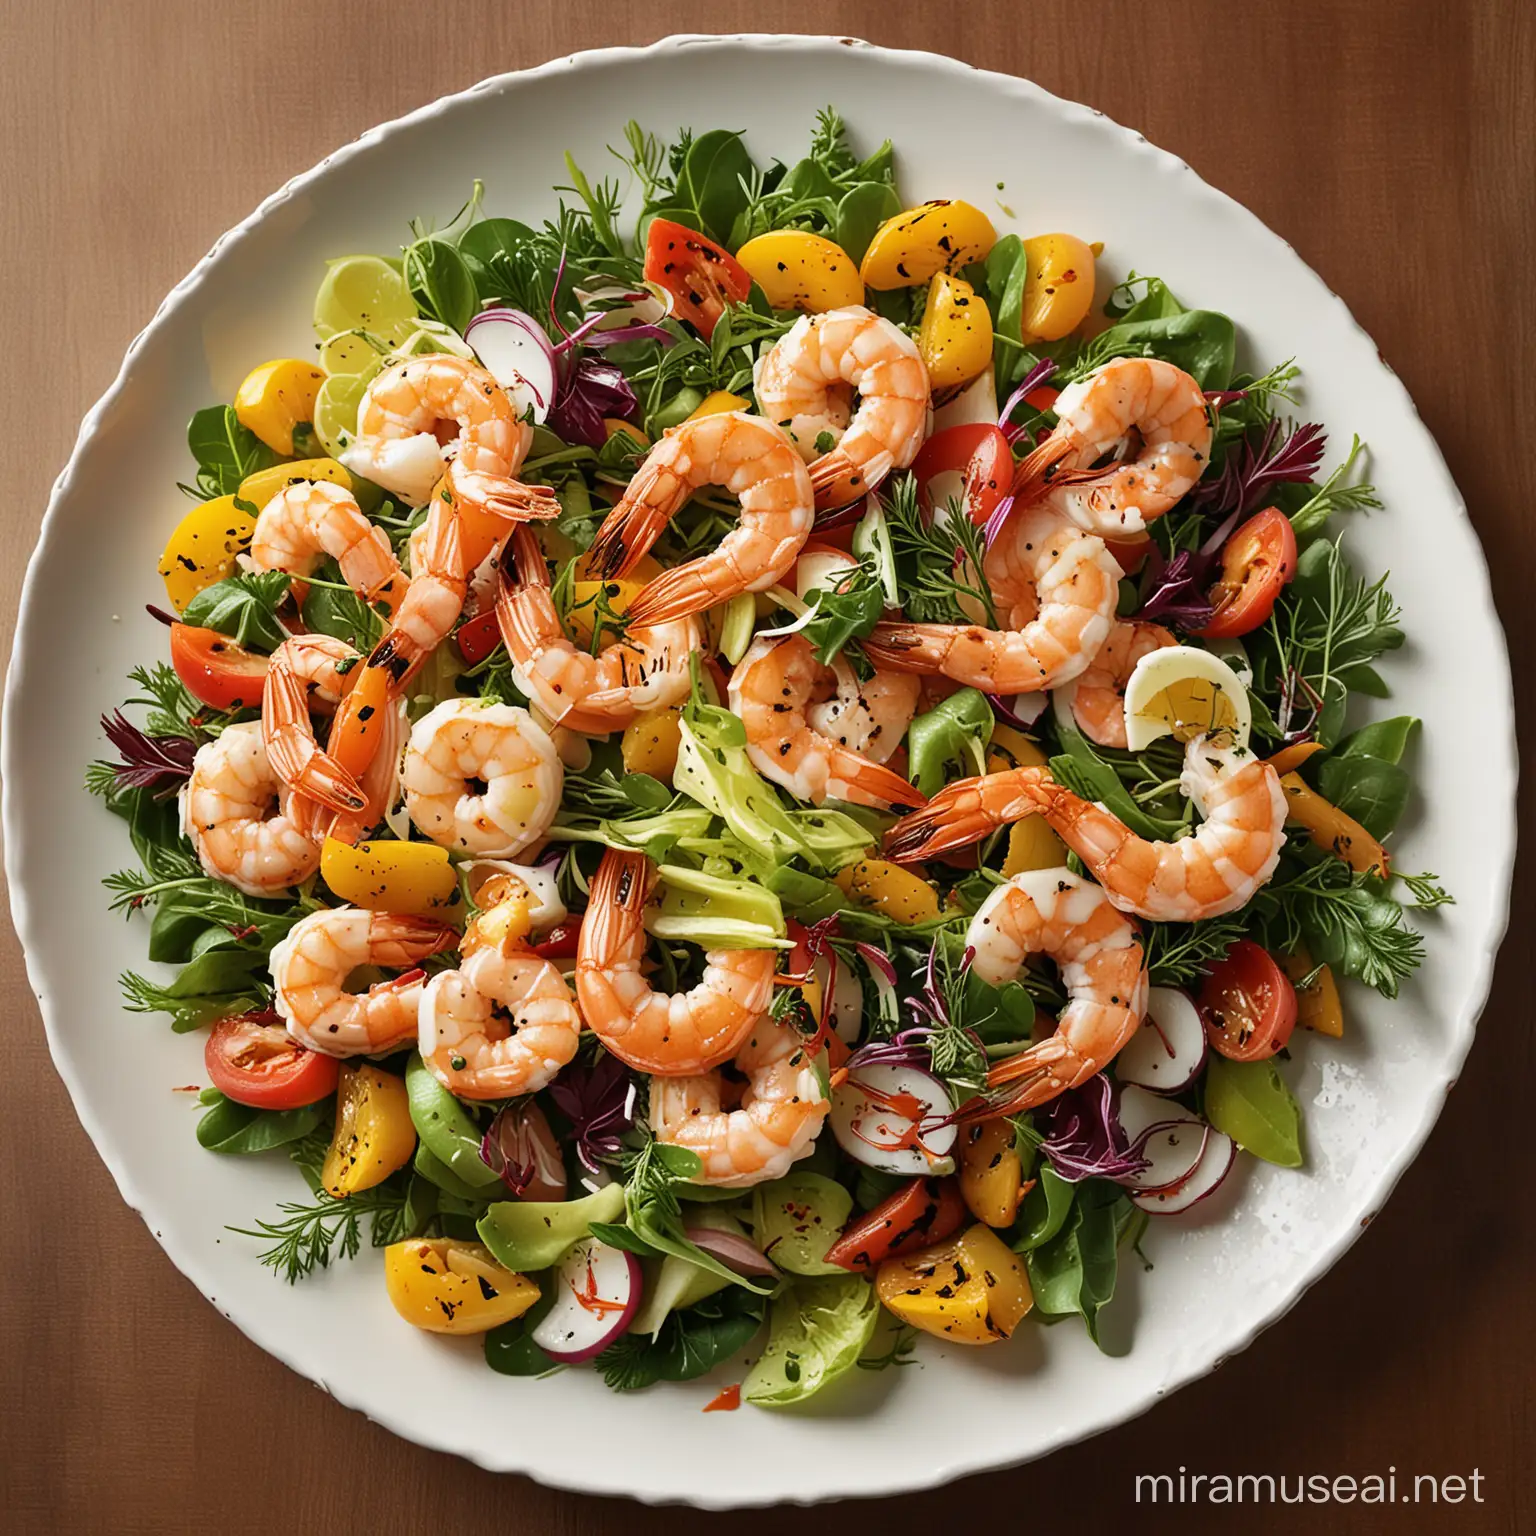 A tantalizing salad arrangement sits atop a white plate, showcasing vibrant colors and textures. Boiled or grilled shrimp, nestled among a lush bed of crisp greens and an assortment of colorful vegetables, takes center stage. The shrimp glisten with a golden hue, enticing the viewer with their succulent appeal. A drizzle of dressing, cascading gracefully over the salad, adds a touch of flavor and moisture. The composition exudes freshness and simplicity, promising a delightful culinary experience for those who indulge.